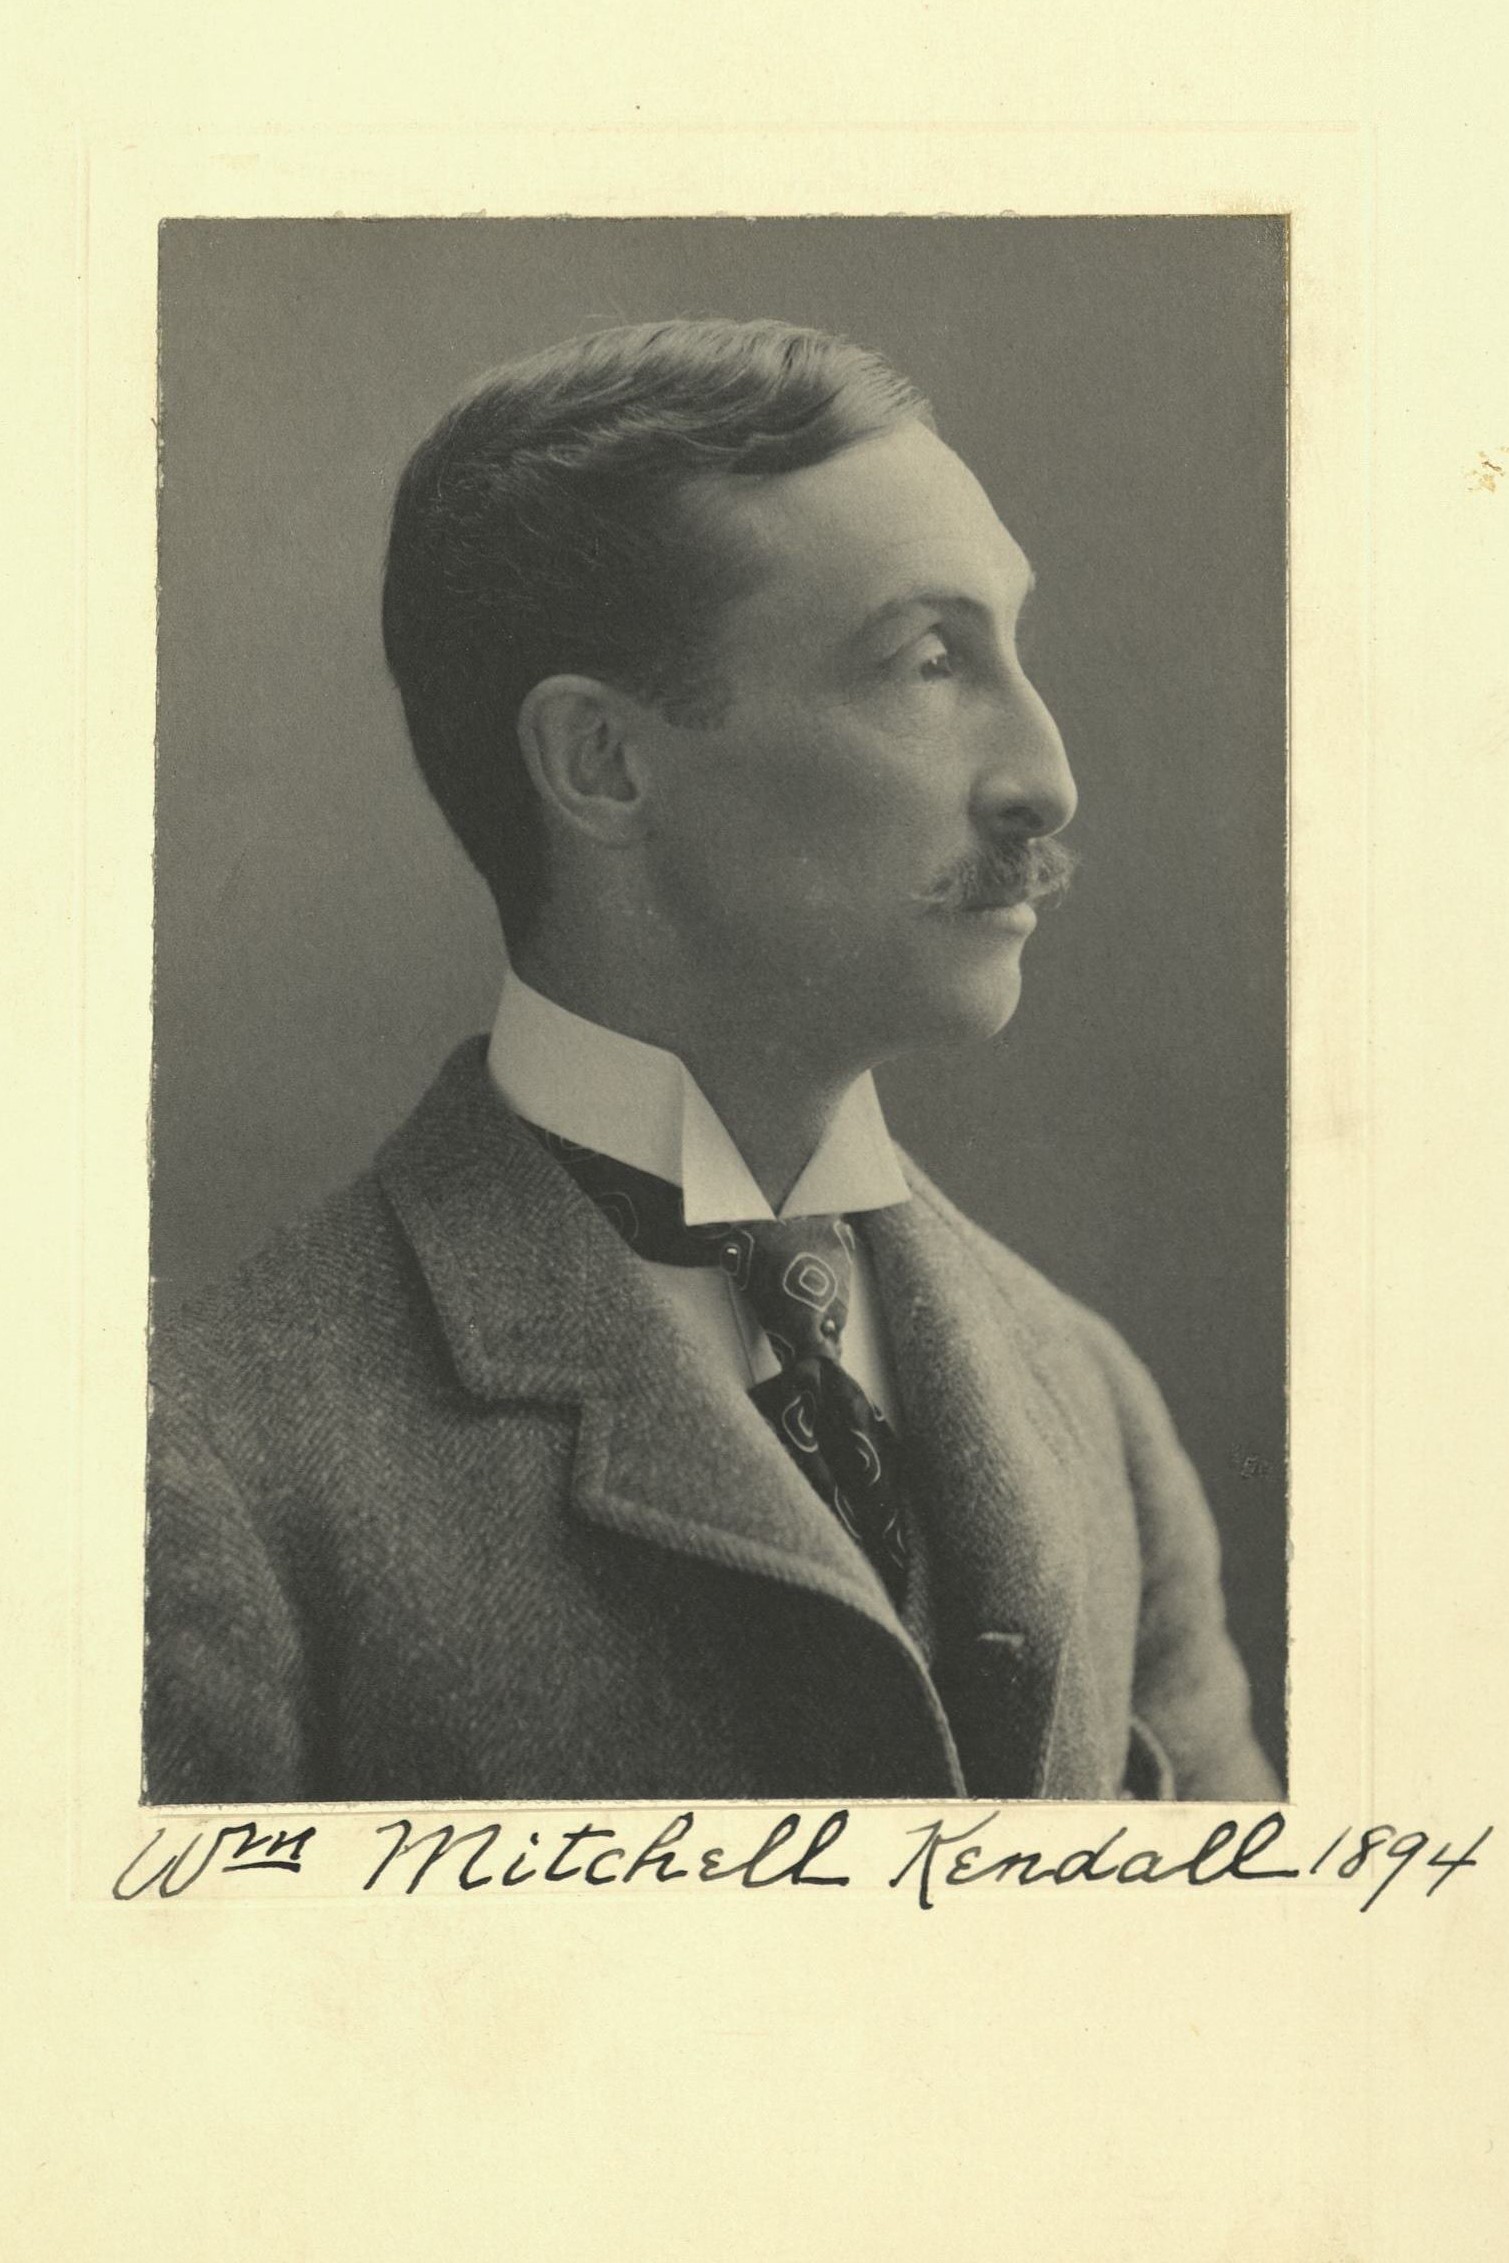 Member portrait of William Mitchell Kendall